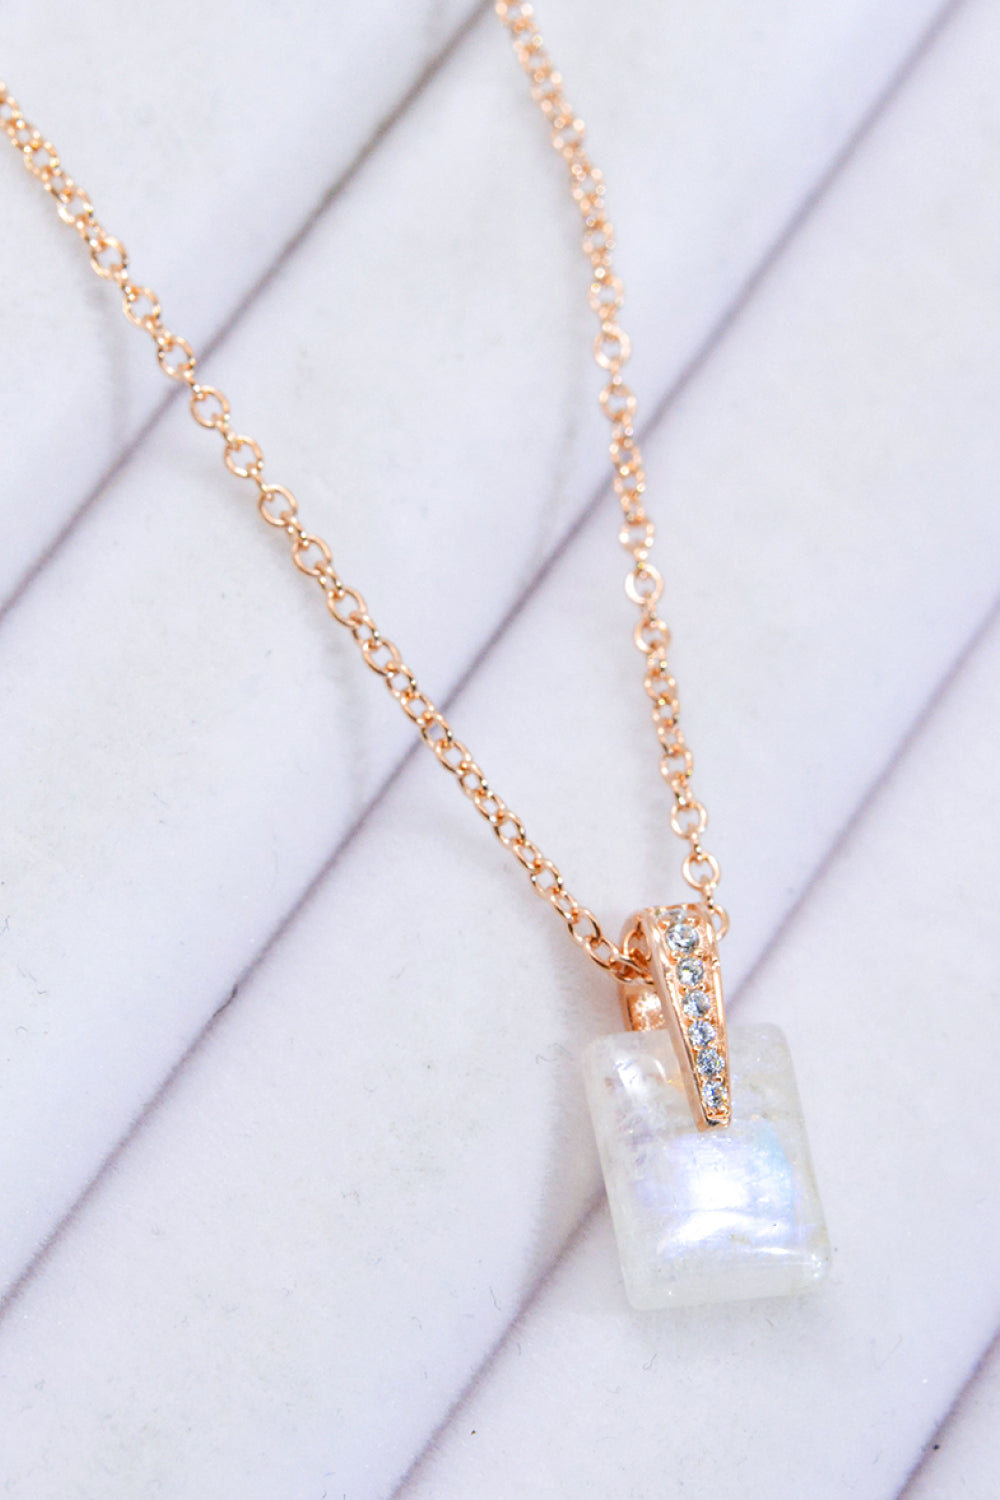 Lavender 925 Sterling Silver Natural Moonstone Pendant Necklace Sentient Beauty Fashions necklaces